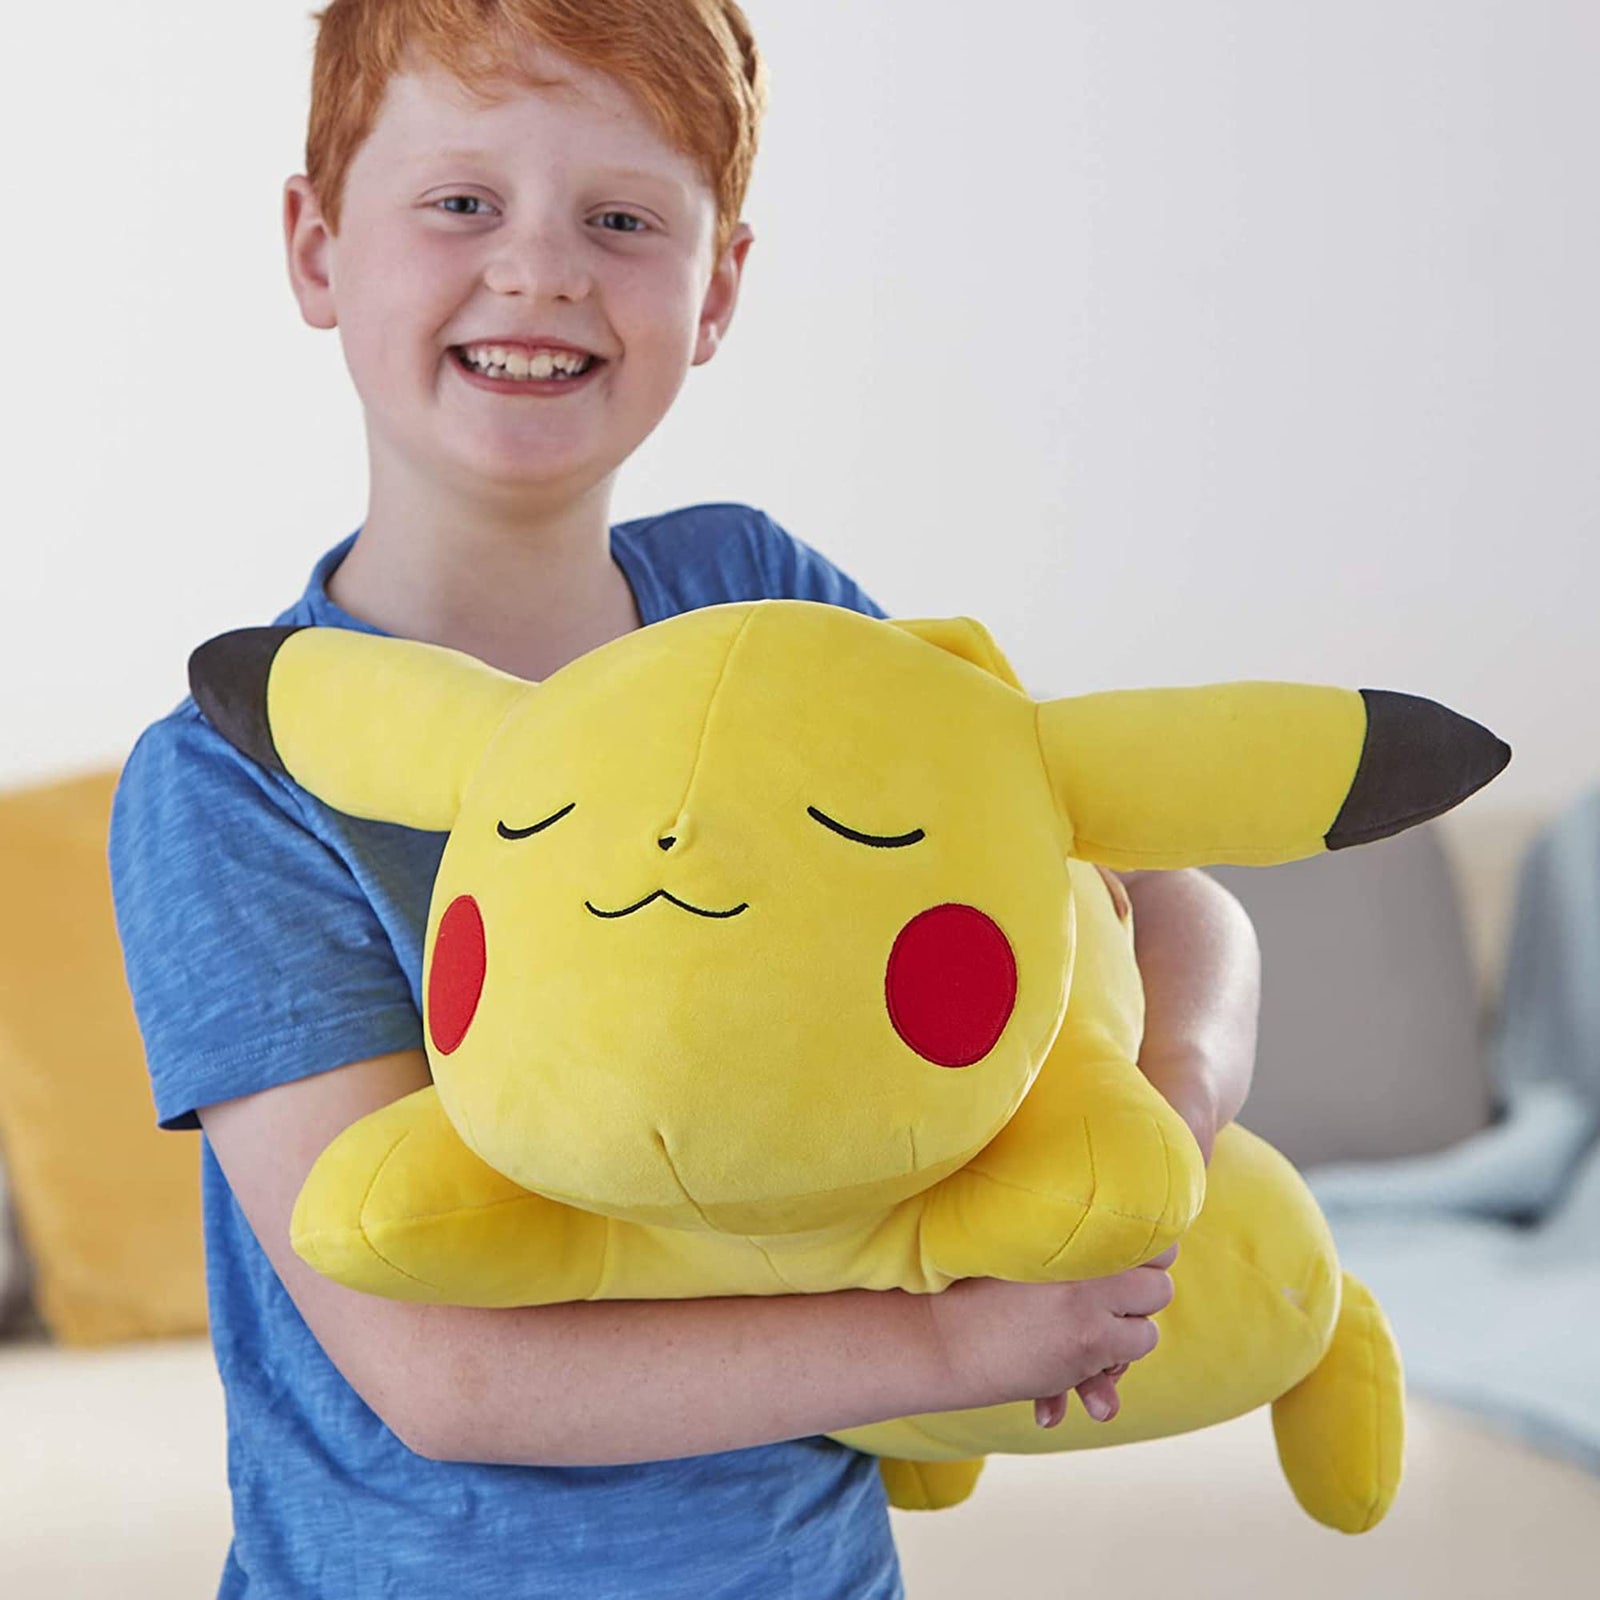 Pokemon 18” Plush Sleeping Pikachu - Cuddly Must Have Fans - Plush Perfect for Traveling, Car Rides, Nap Time, and Play Time!